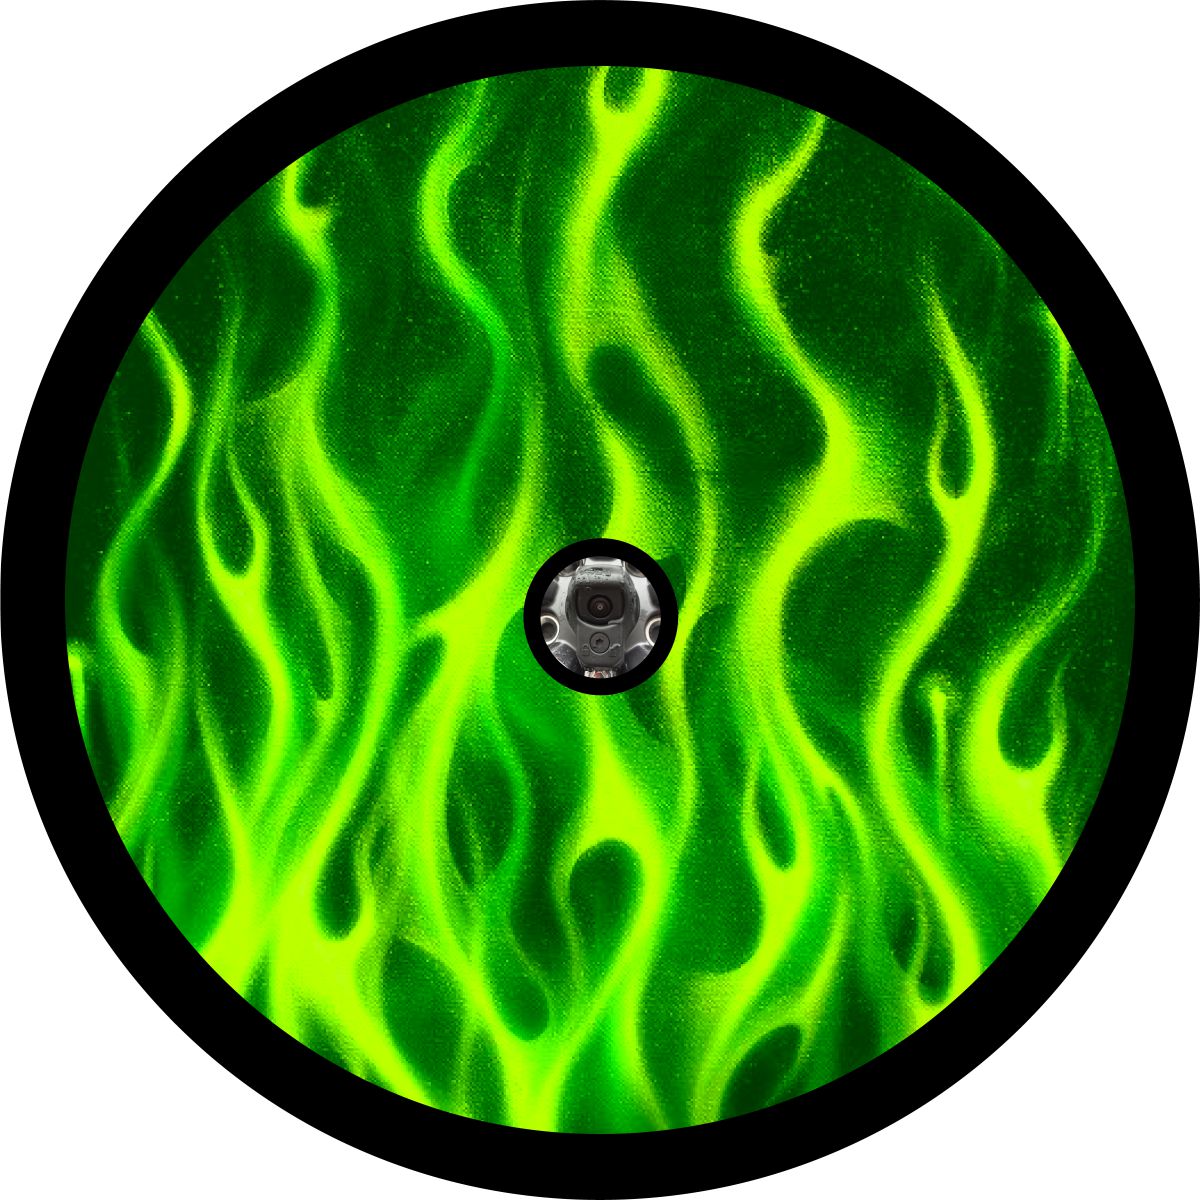 Spare tire cover - neon green flames, Gecko green Jeep Wrangler spare tire cover. Spare tire cover for RV, Bronco, Jeep, Camper, and more. Made with a back-up camera design